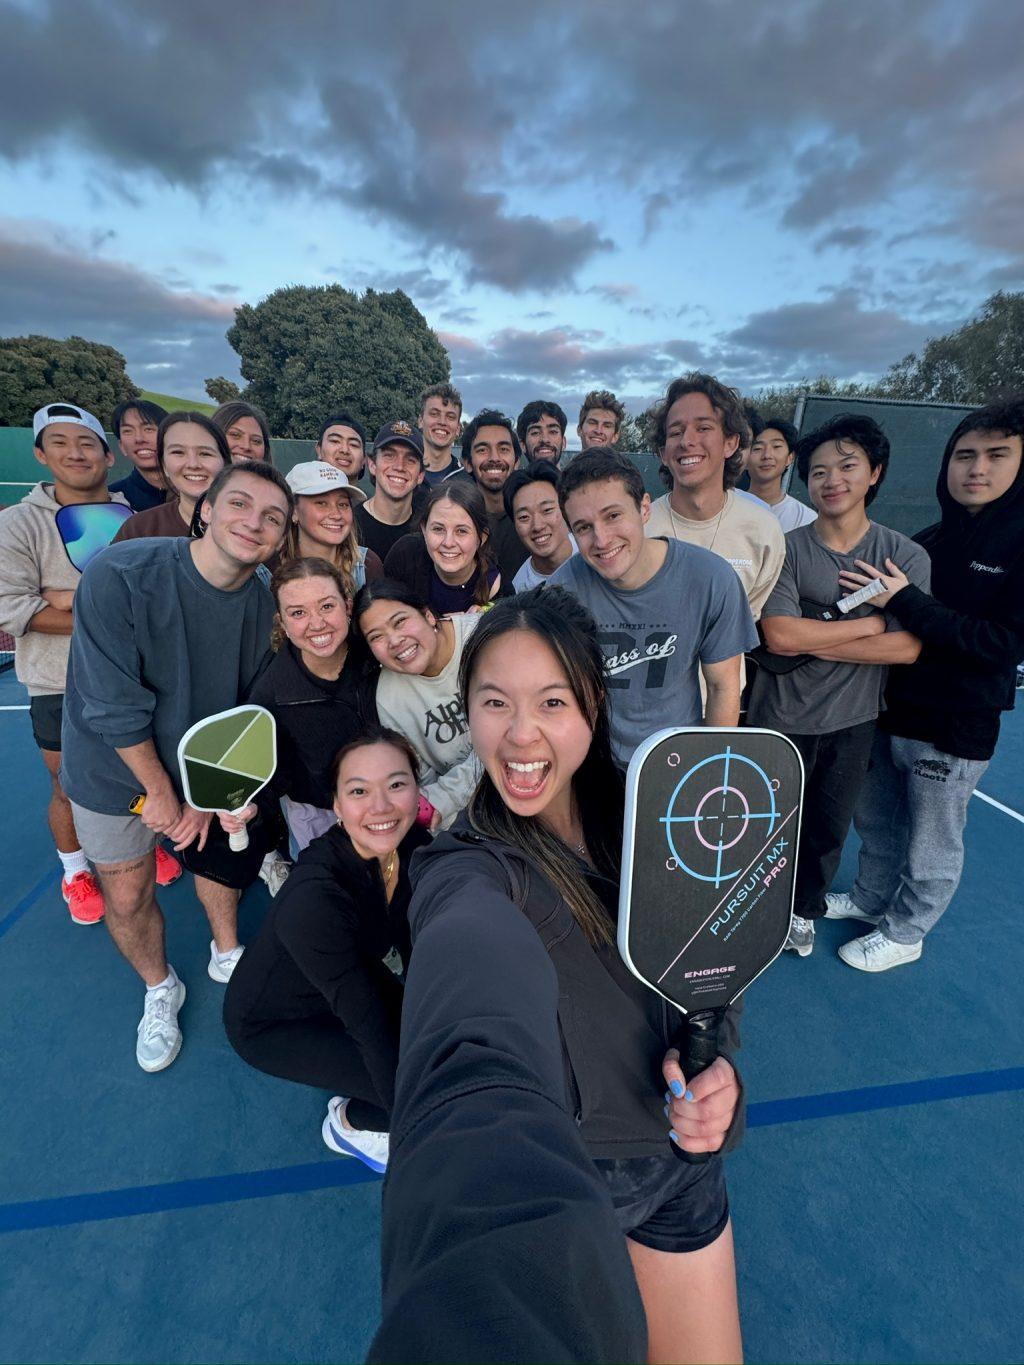 Hsu takes a 0.5 selfie with members of Pepp Pickle during an open play session Feb. 9, at Lower Alumni Courts. It is a Pepp Pickle tradition to take 0.5 selfies together after open plays, Hsu said. Photo courtesy of Katelyn Hsu